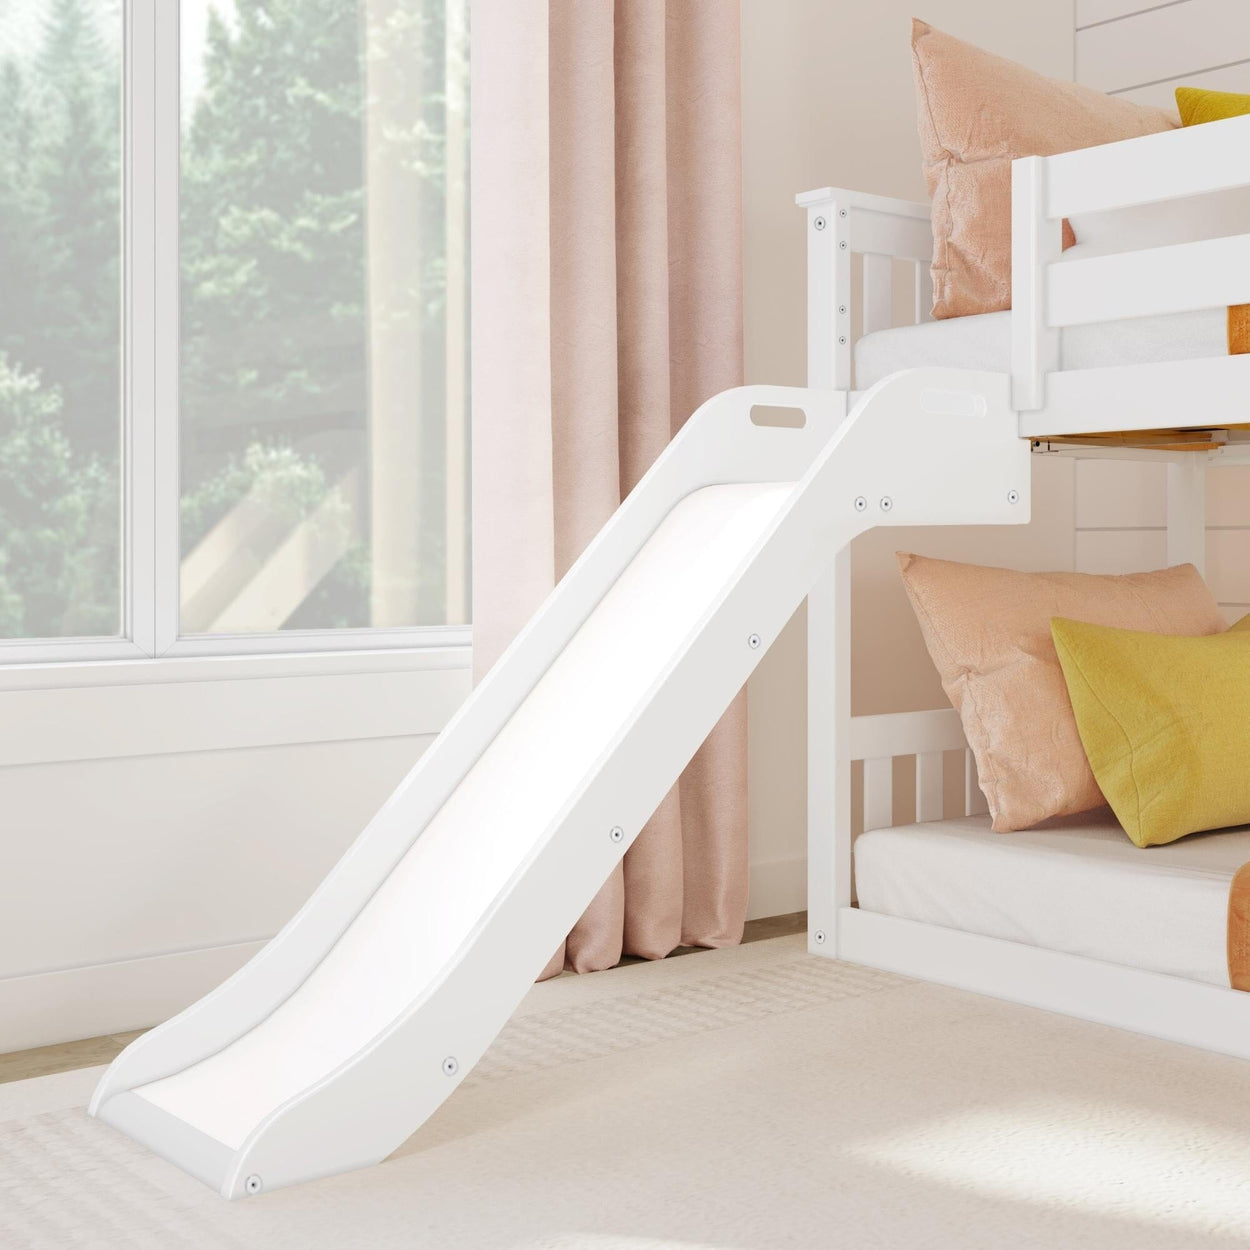 180417-002 : Bunk Beds Max & Lily Twin Over Twin Low Bunk with Slide and Ladder, Wooden Bunk beds with 14” Safety Guardrail for Kids, Toddlers, Boys, Girls, Teens, Bedroom Furniture, White